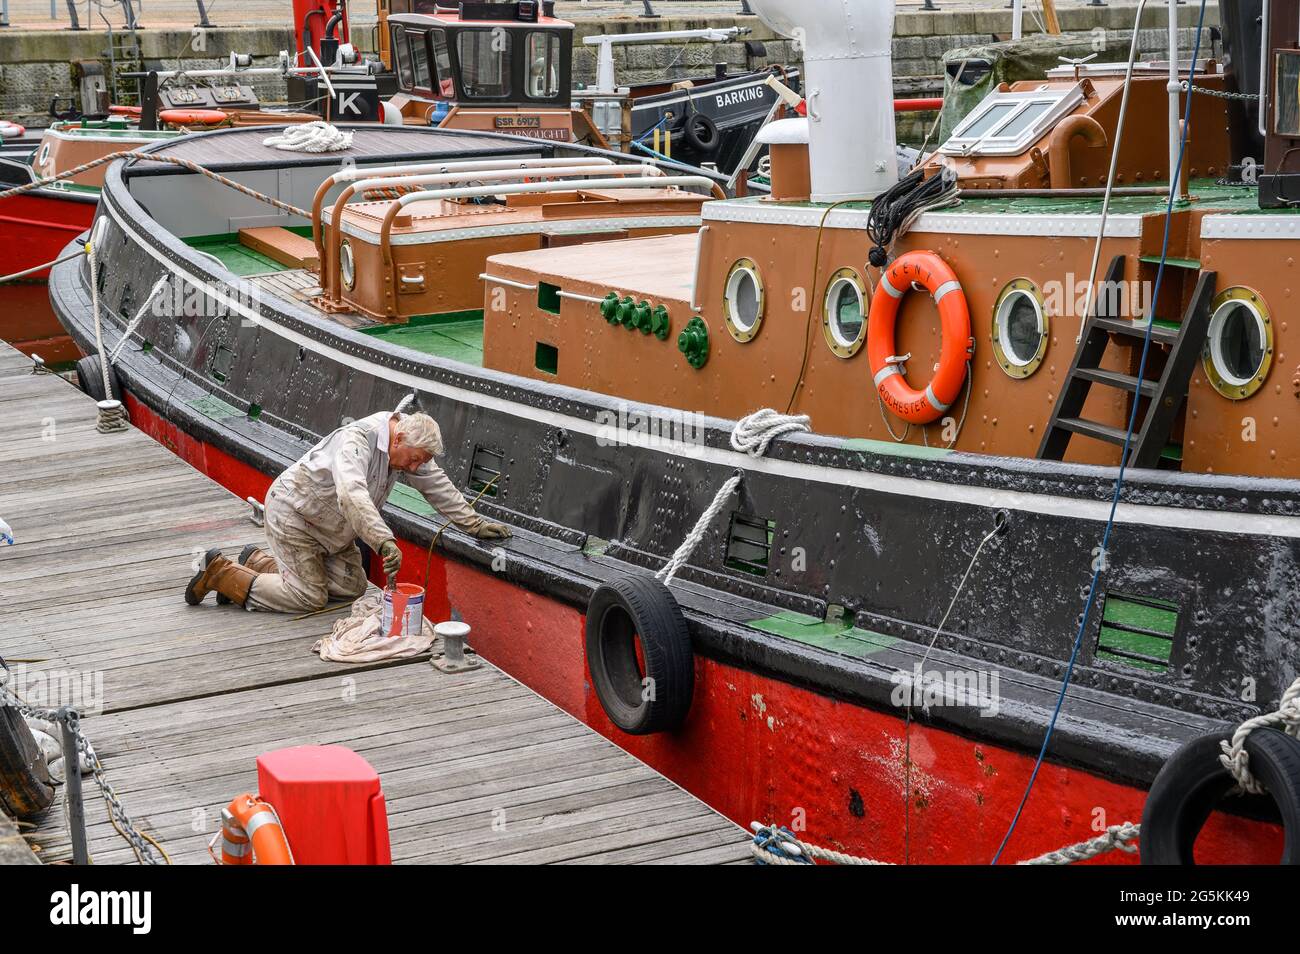 A volunteer from South Eastern Tug Society painting the hull of M.T. Kent tug boat while moored at Chatham Maritime Marina, Kent, England. Stock Photo